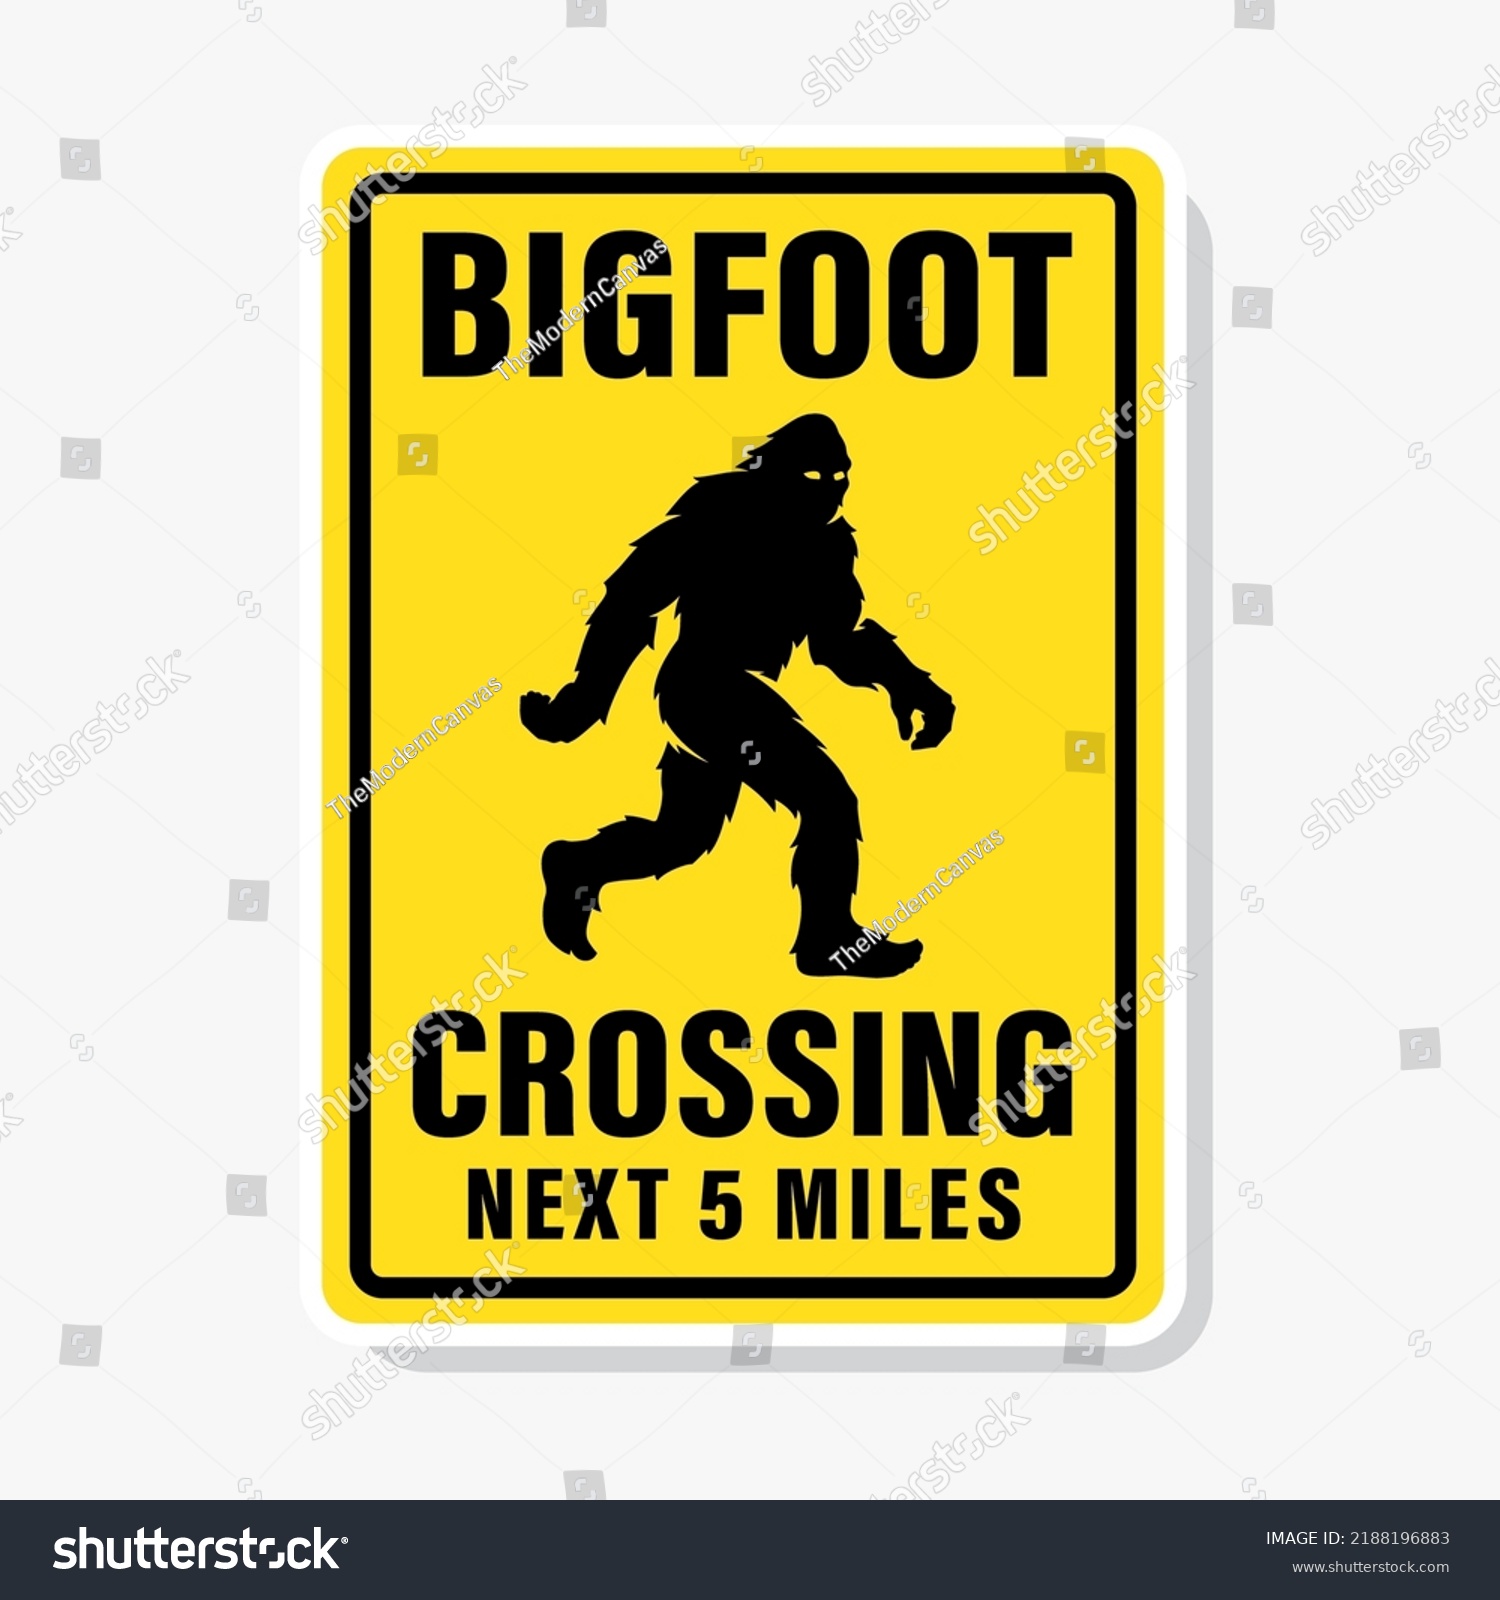 SVG of Bigfoot crossing sign. Sasquatch walking symbol. Hairy wild man cryptid poster. Mythical cryptozoology creature silhouette icon. Vector illustration. svg